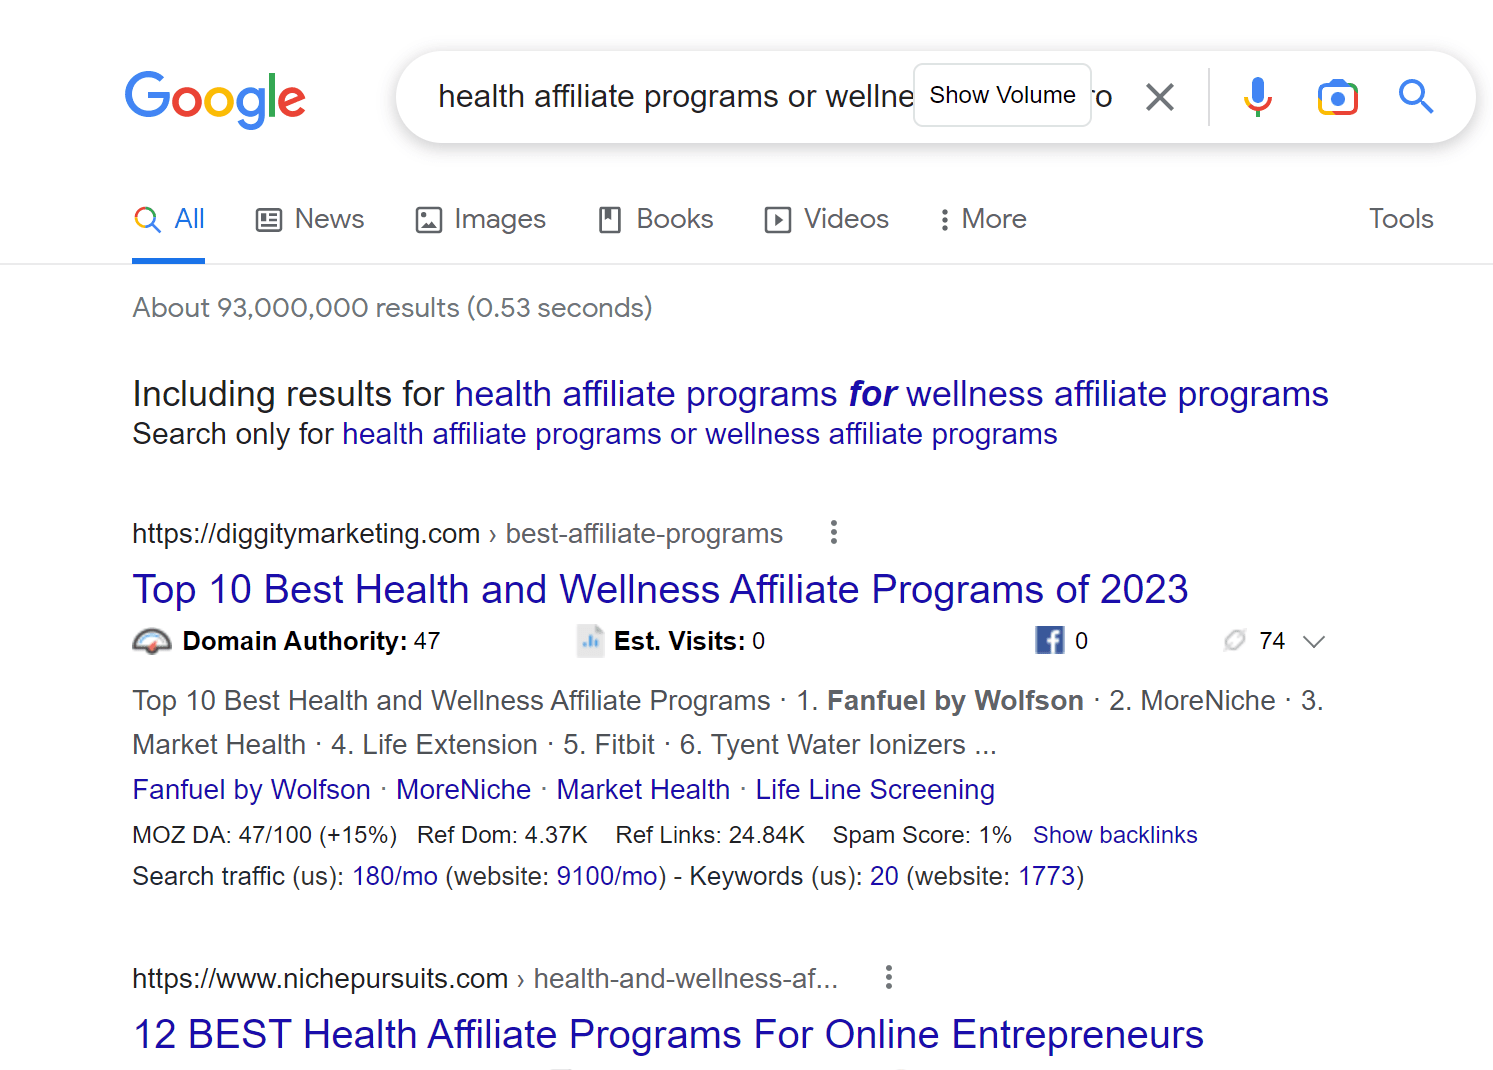 alt="Google search results for health and wellness affiliate programs"